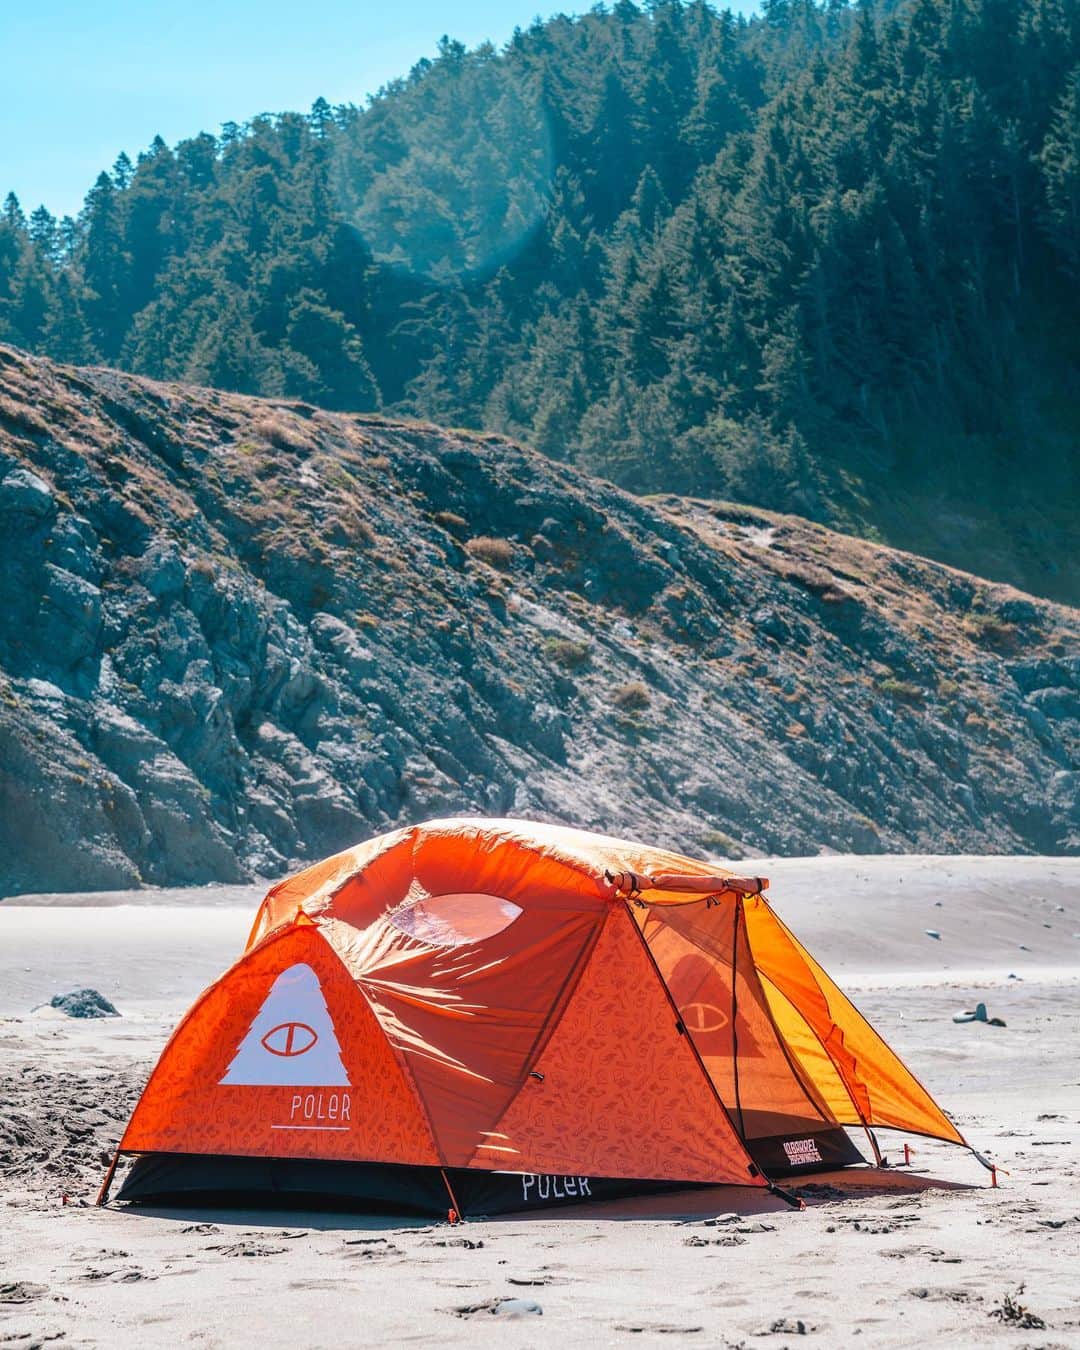 Poler Outdoor Stuffのインスタグラム：「🚨❗️POLER x 10 BARREL GIVEAWAY ❗️🚨   Attention all adventure and beer enthusiasts! Here’s your chance to elevate your camping gear and win a full camp setup for two from @polerstuff and @10barrelbrewing 🏕️🍻   One lucky winner will receive a kit from our exclusive 10 Barrel x Poler collaboration including: (1) 2+ Person Tent (2) Stowaway Chairs (2) Ponchos (1) Camera Cooler   To get one step closer to drinking beer outside, follow these simple steps: 1.  Like this post 2.  Make sure you’re following @polerstuff and @10barrelbrewing 3. Tag all your camping buddies (each tag is an entry) 3. Repost for bonus entries   The winner will be chosen at random and announced on October 27th at 1PM PST. This sweepstakes is open to the United States only. Must be 21 & over to participate. No purchase necessary to enter. Employees and family members of 10 Barrel and affiliates are not eligible. 10 Barrel shall have sole and exclusive discretion to apply giveaway rules, including disqualification of entries that fail to comply with the same. Void where prohibited. We will not contact you from any account besides @10barrelbrewing or @polerstuff   #10BarrelxPolerSweepstakes #GoCampingDrinkBeer #DrinkBeerOutside #CampVibes」